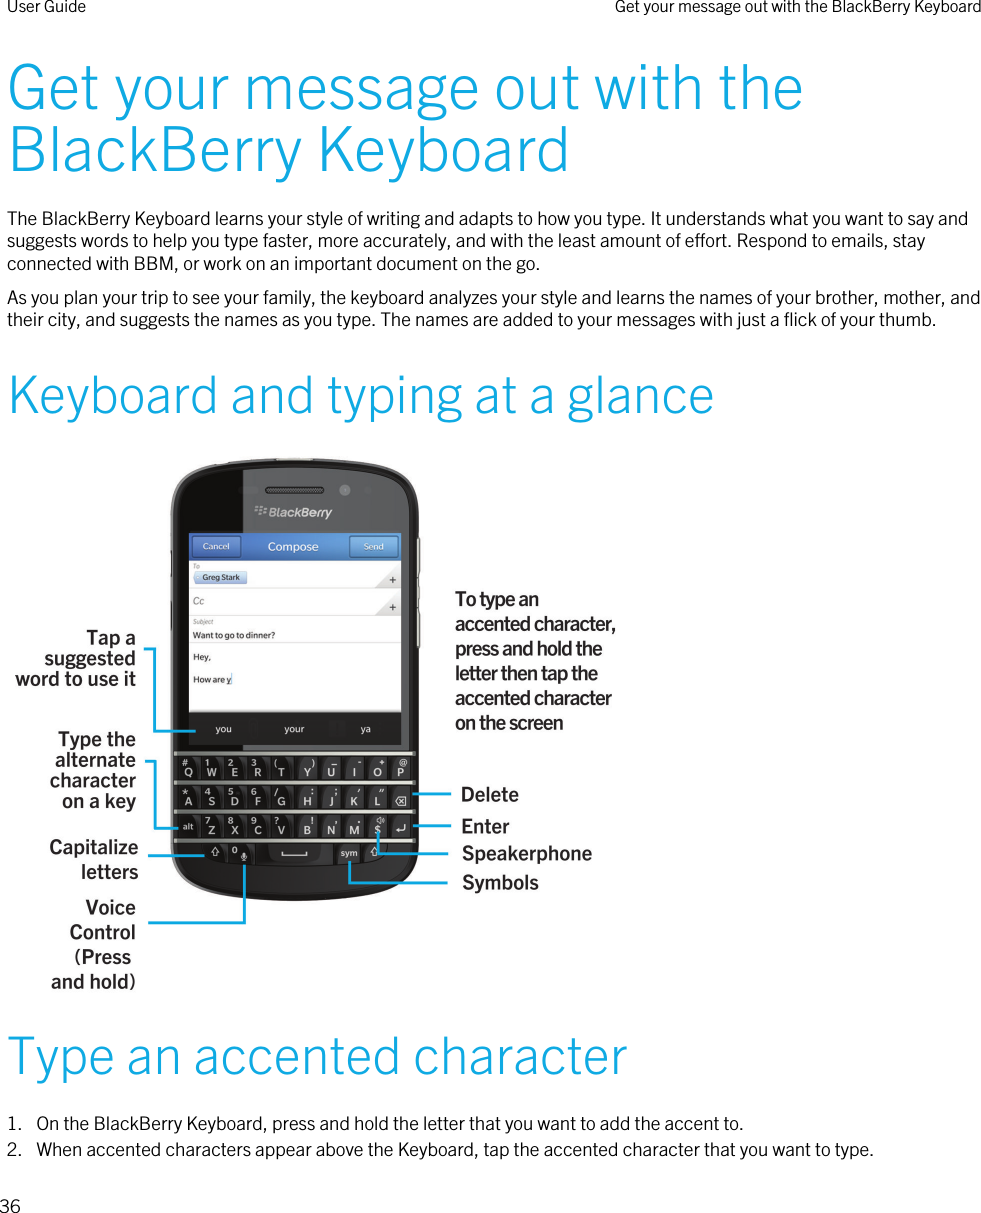 Get your message out with the BlackBerry KeyboardThe BlackBerry Keyboard learns your style of writing and adapts to how you type. It understands what you want to say and suggests words to help you type faster, more accurately, and with the least amount of effort. Respond to emails, stay connected with BBM, or work on an important document on the go.As you plan your trip to see your family, the keyboard analyzes your style and learns the names of your brother, mother, and their city, and suggests the names as you type. The names are added to your messages with just a flick of your thumb.Keyboard and typing at a glance Type an accented character1. On the BlackBerry Keyboard, press and hold the letter that you want to add the accent to.2. When accented characters appear above the Keyboard, tap the accented character that you want to type.User Guide Get your message out with the BlackBerry Keyboard36 